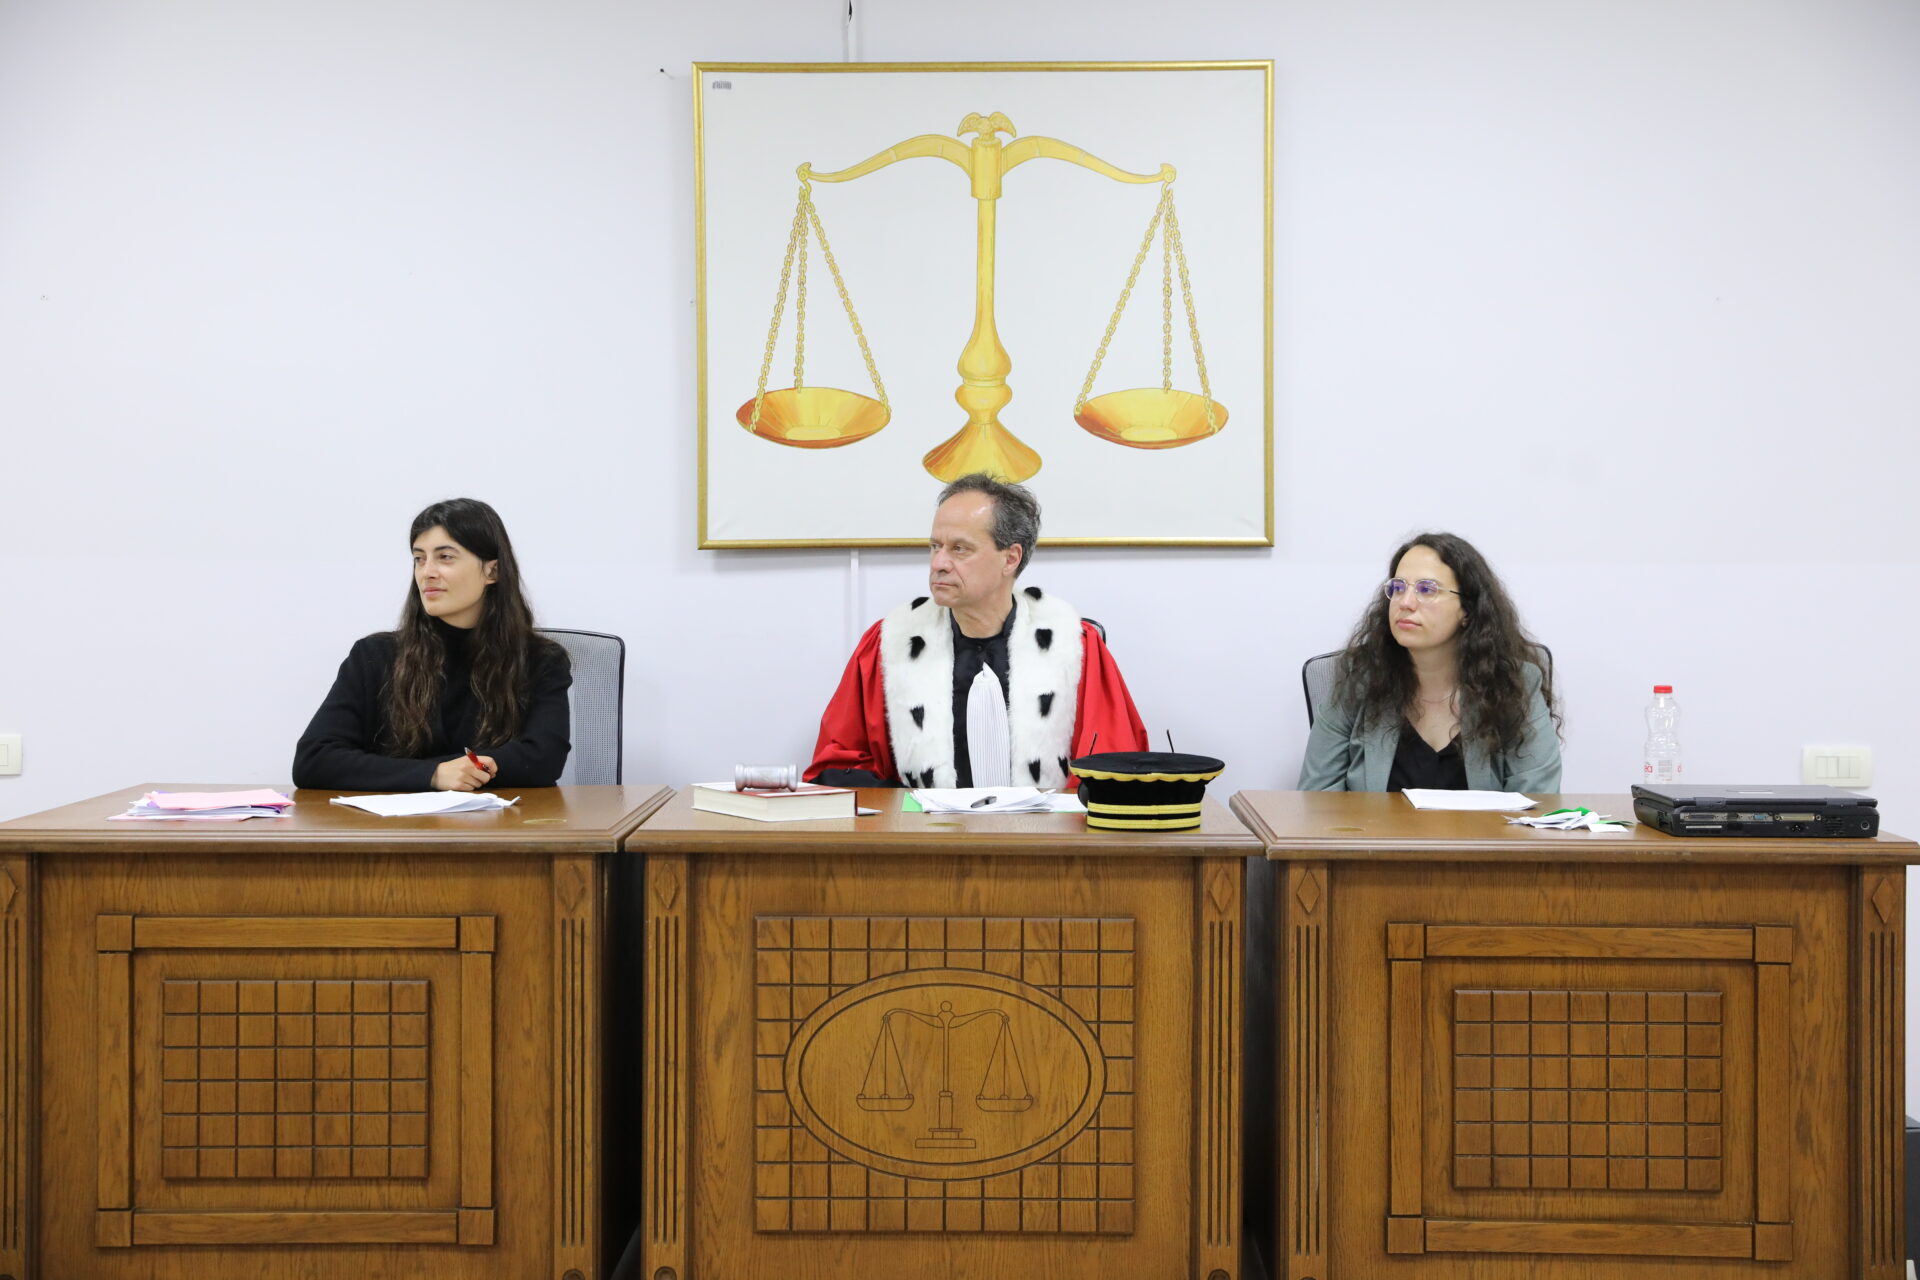 The French Embassy organizes a mock trial session in the Courtroom of the AAB College